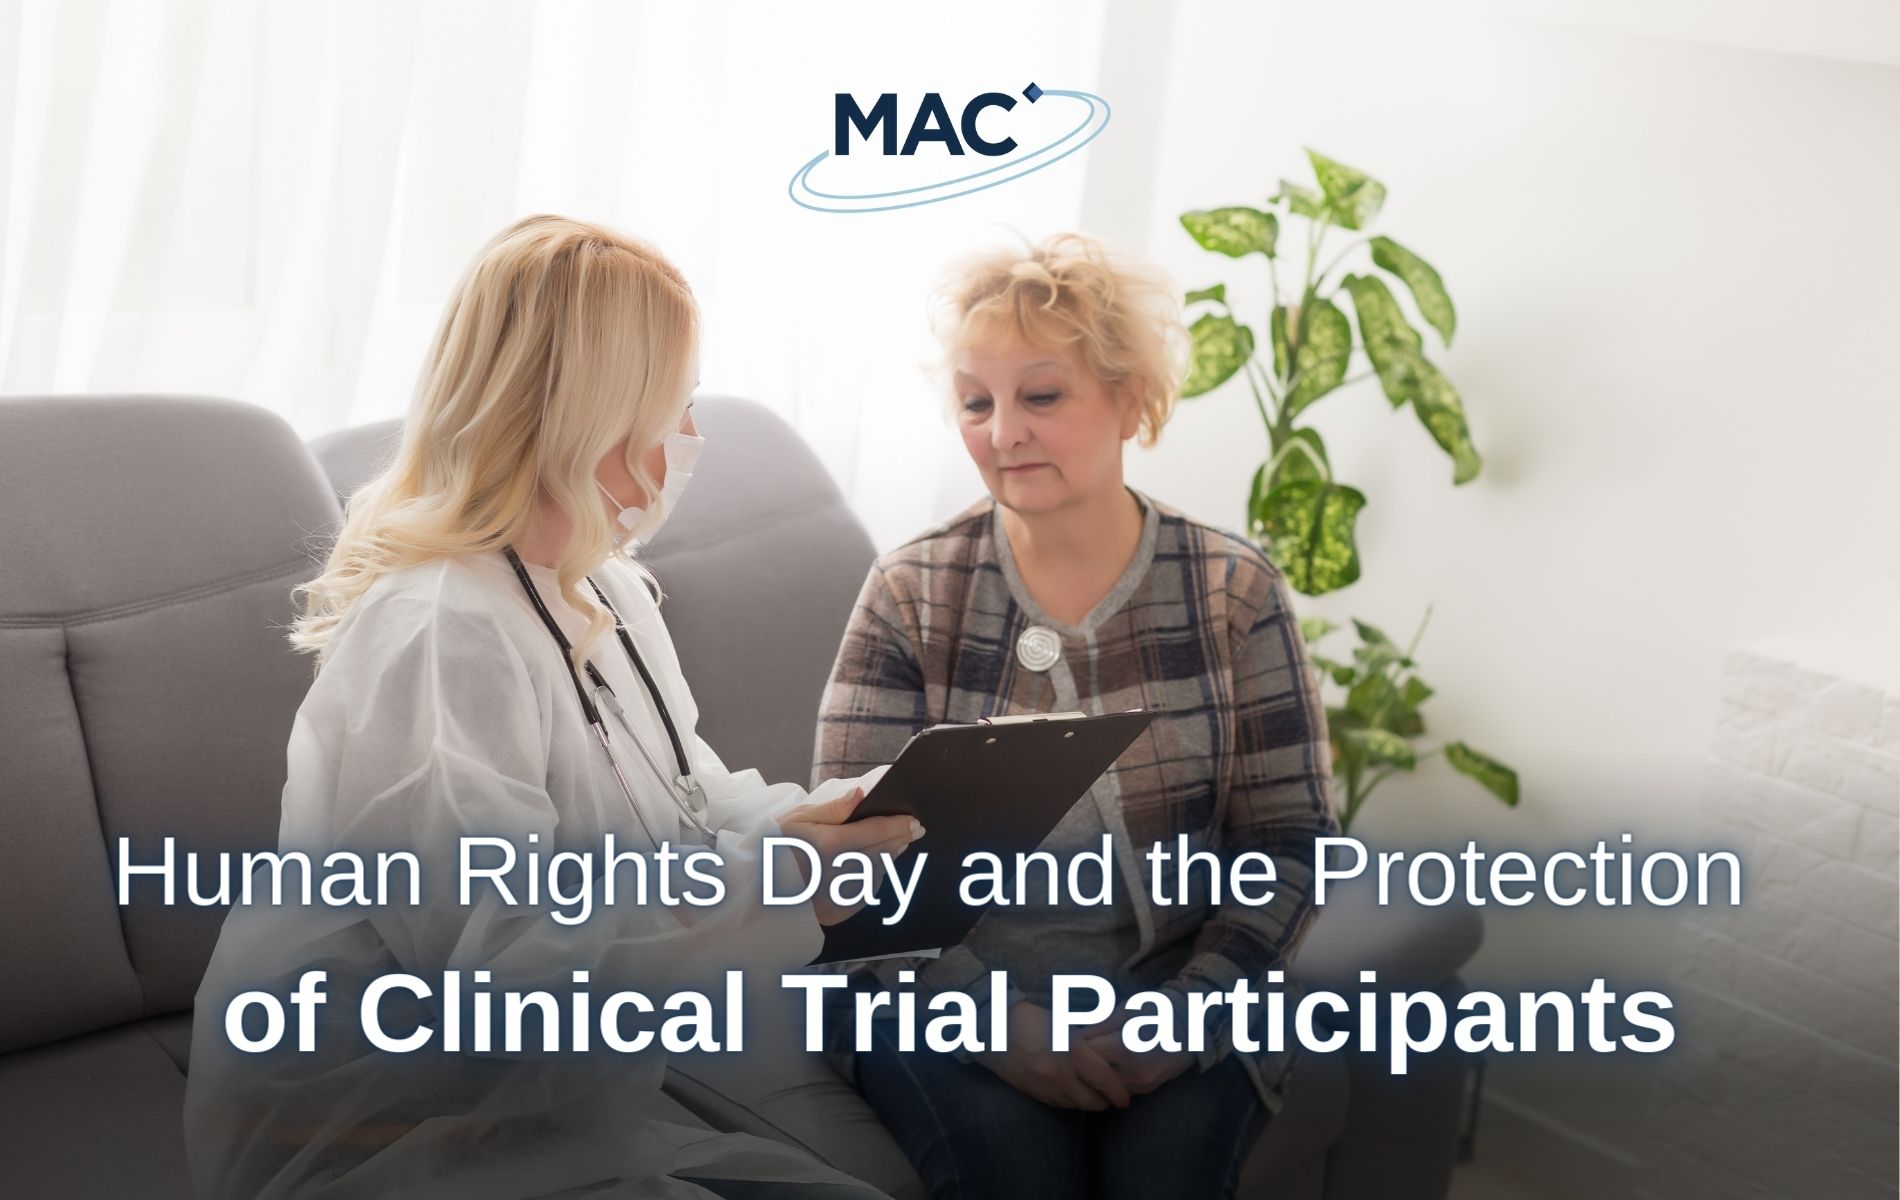 Human Rights Day and the Protection of Clinical Trial Participants